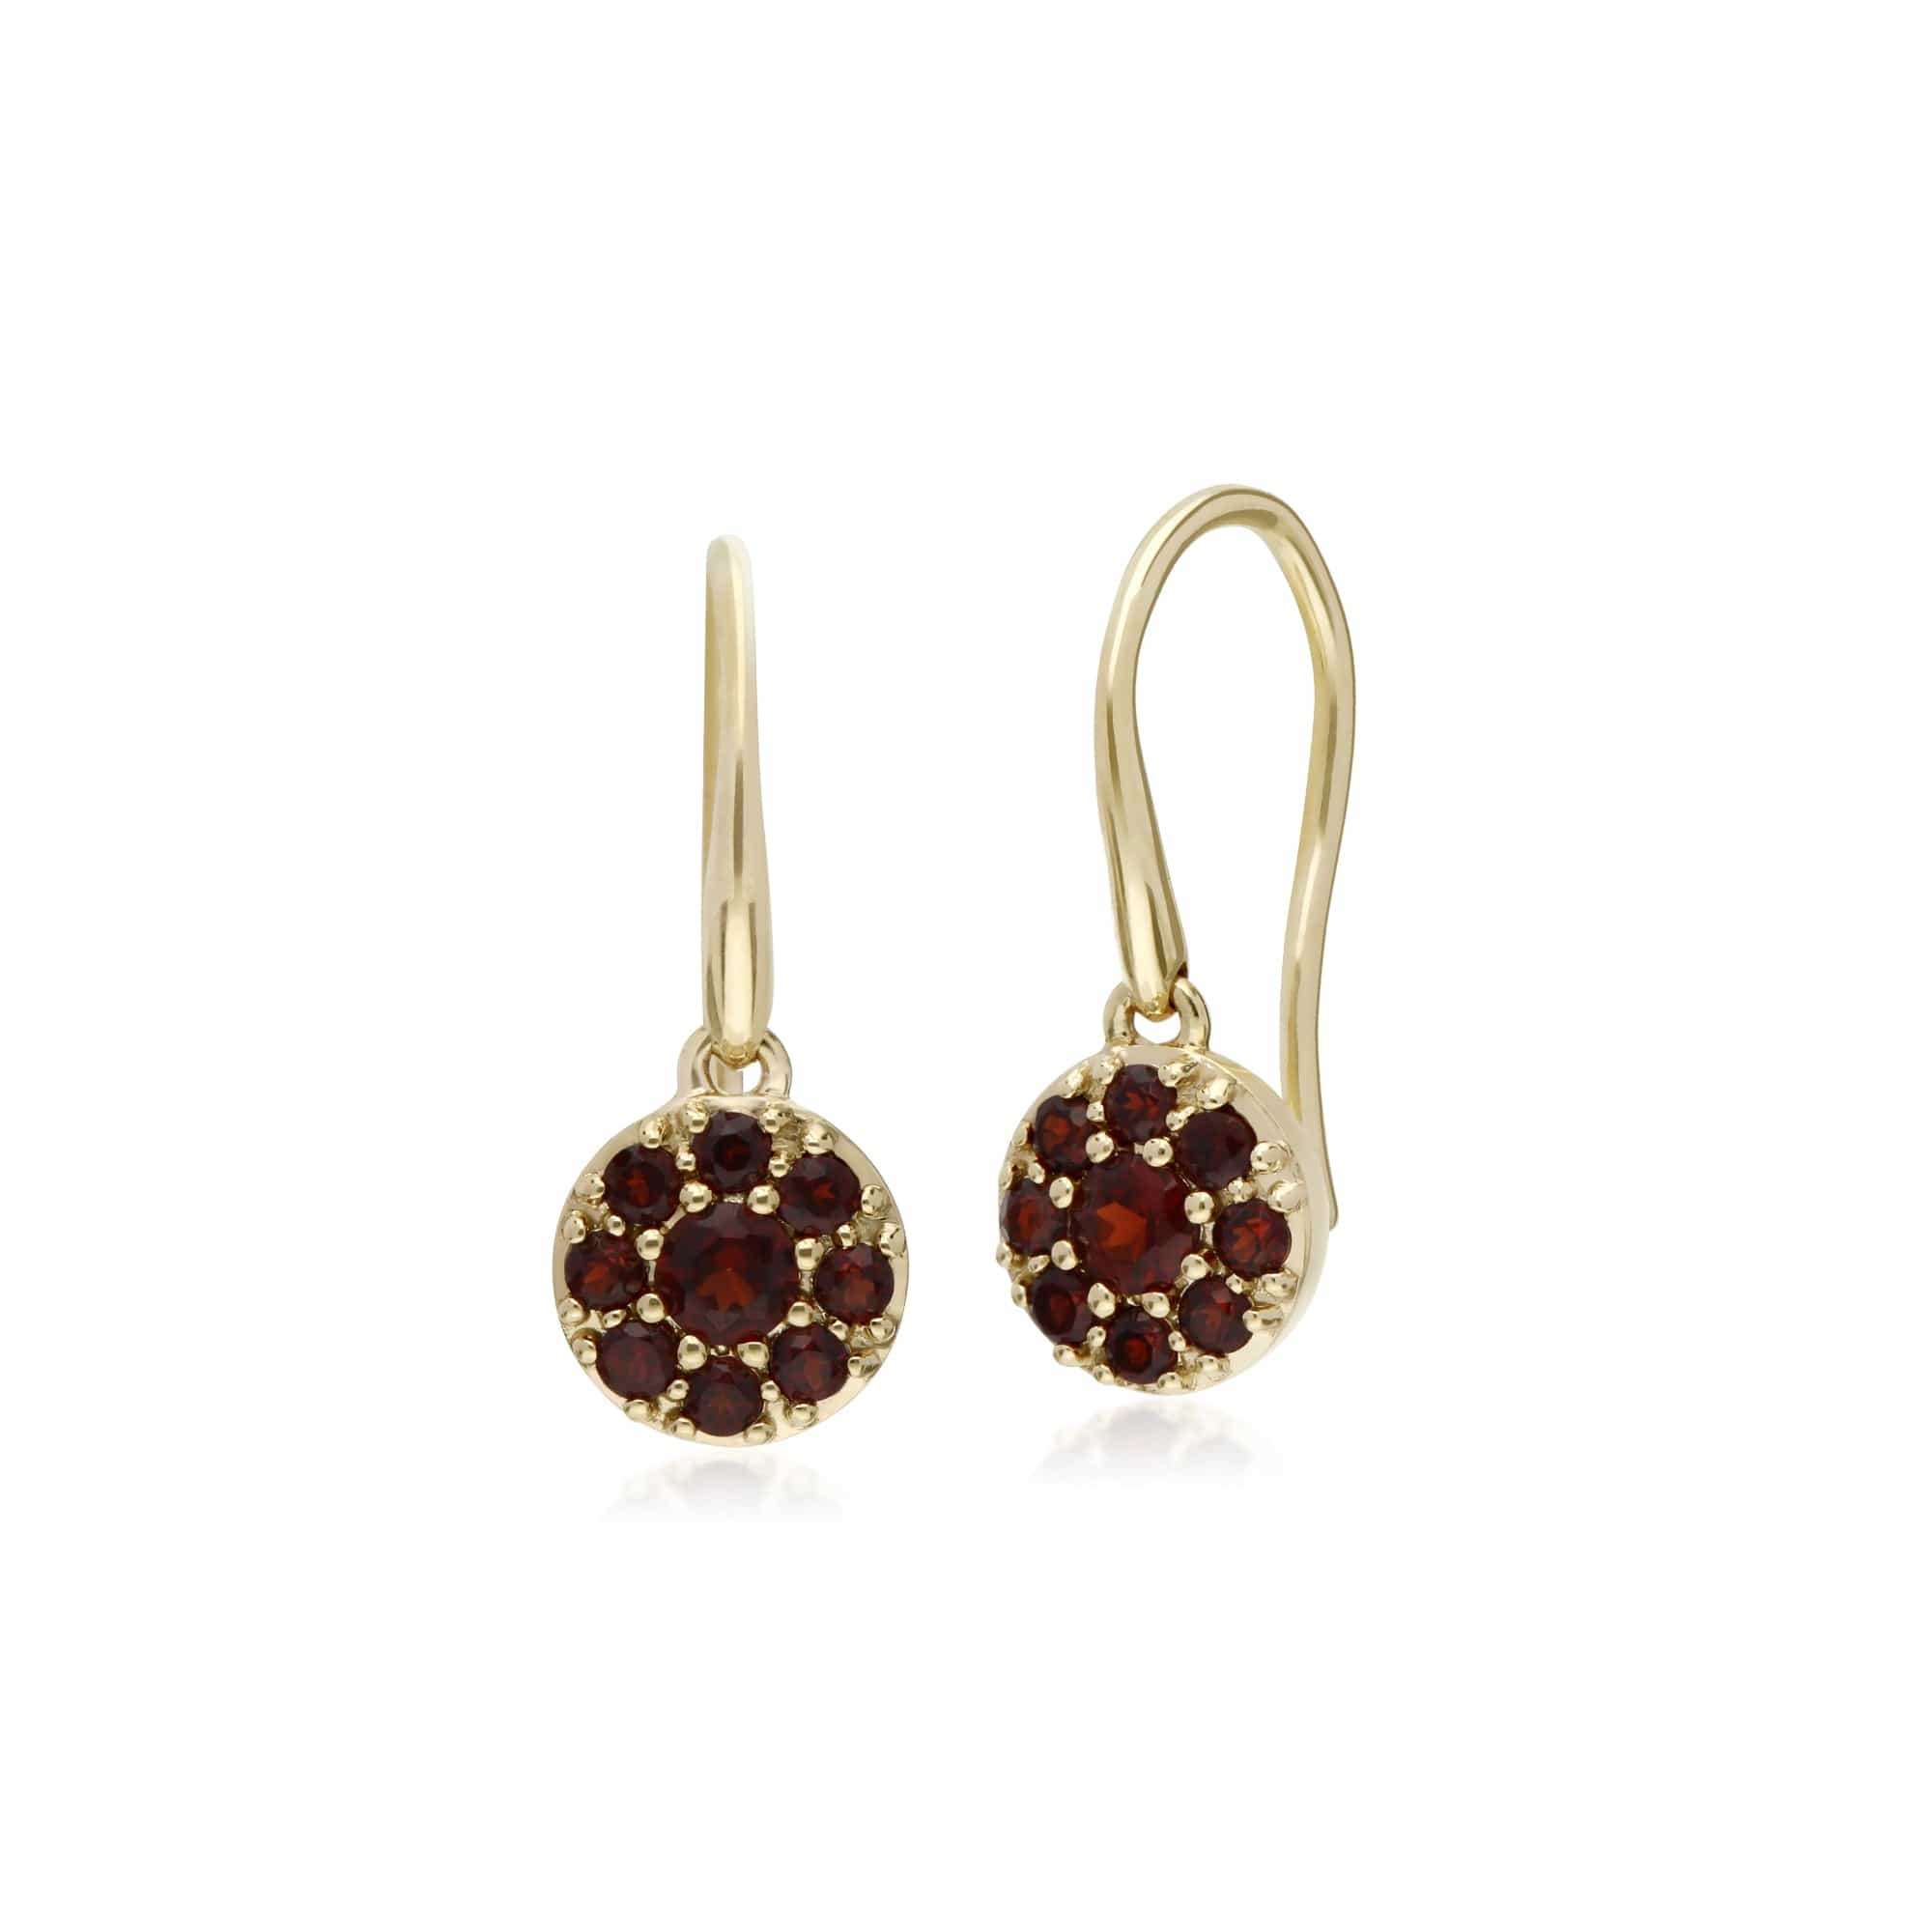 135E1573069-135P1910069 Classic Round Garnet Cluster Drop Earrings & Pendant Set in 9ct Yellow Gold 2